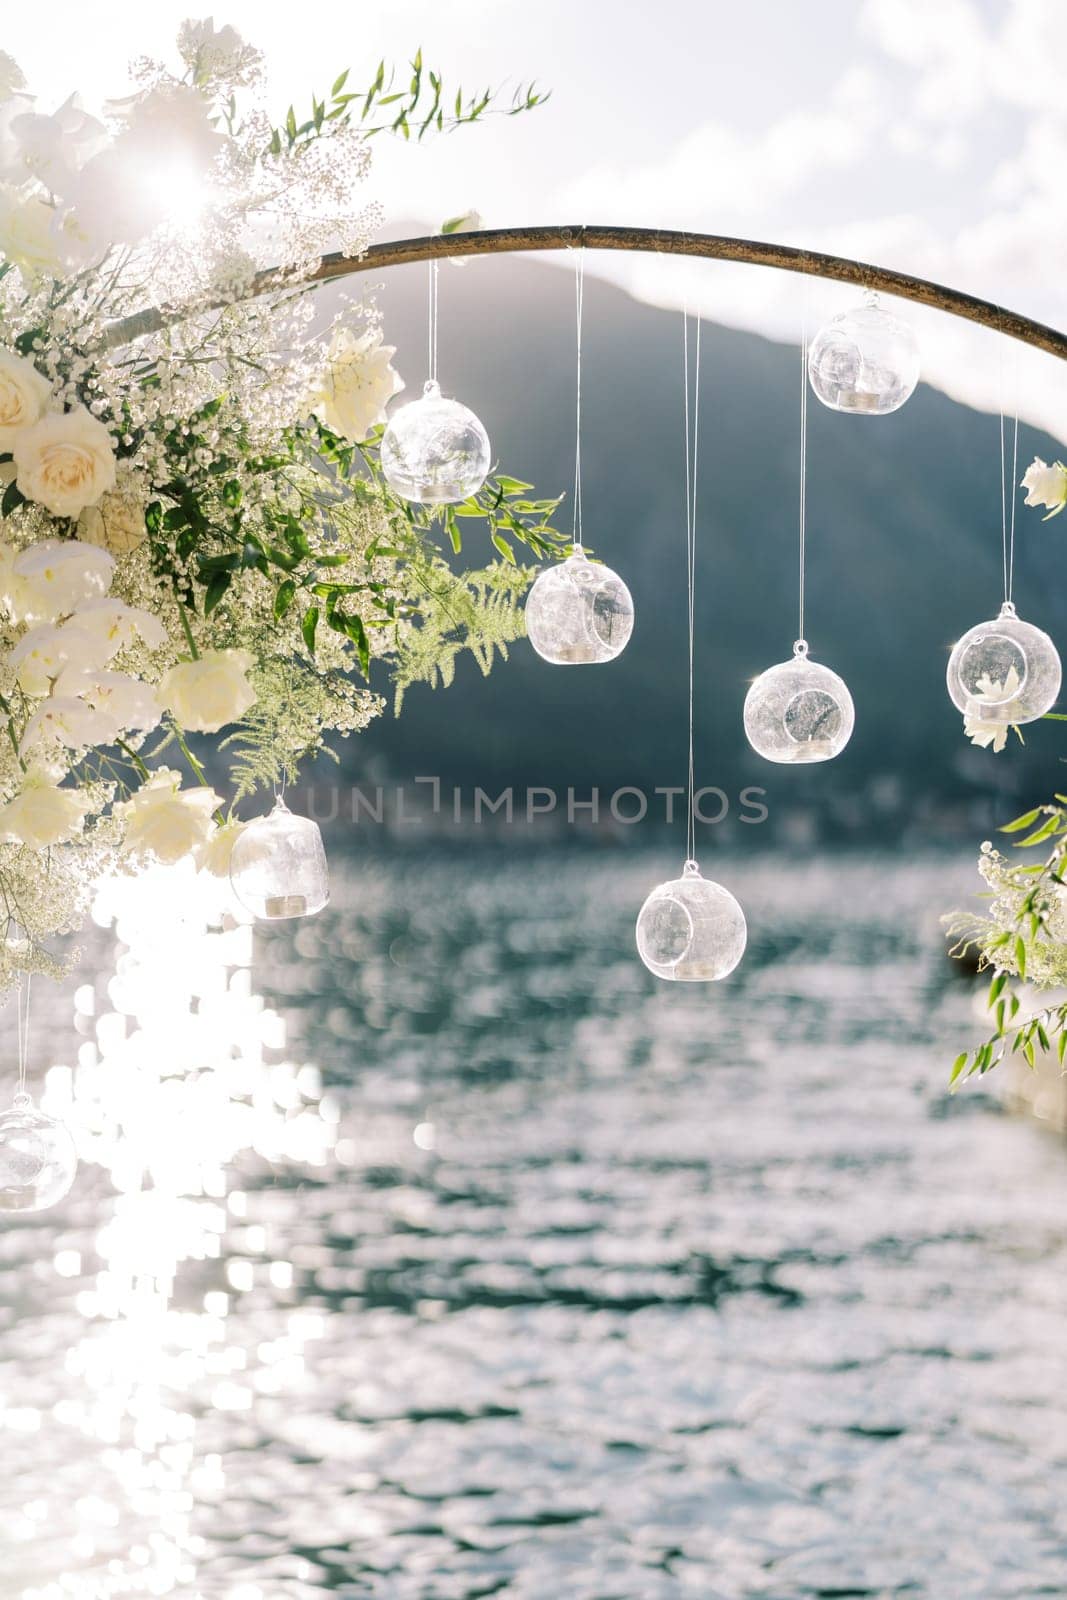 Tablet candles in round ball-candlesticks hang from a wedding arch standing by the sea. High quality photo